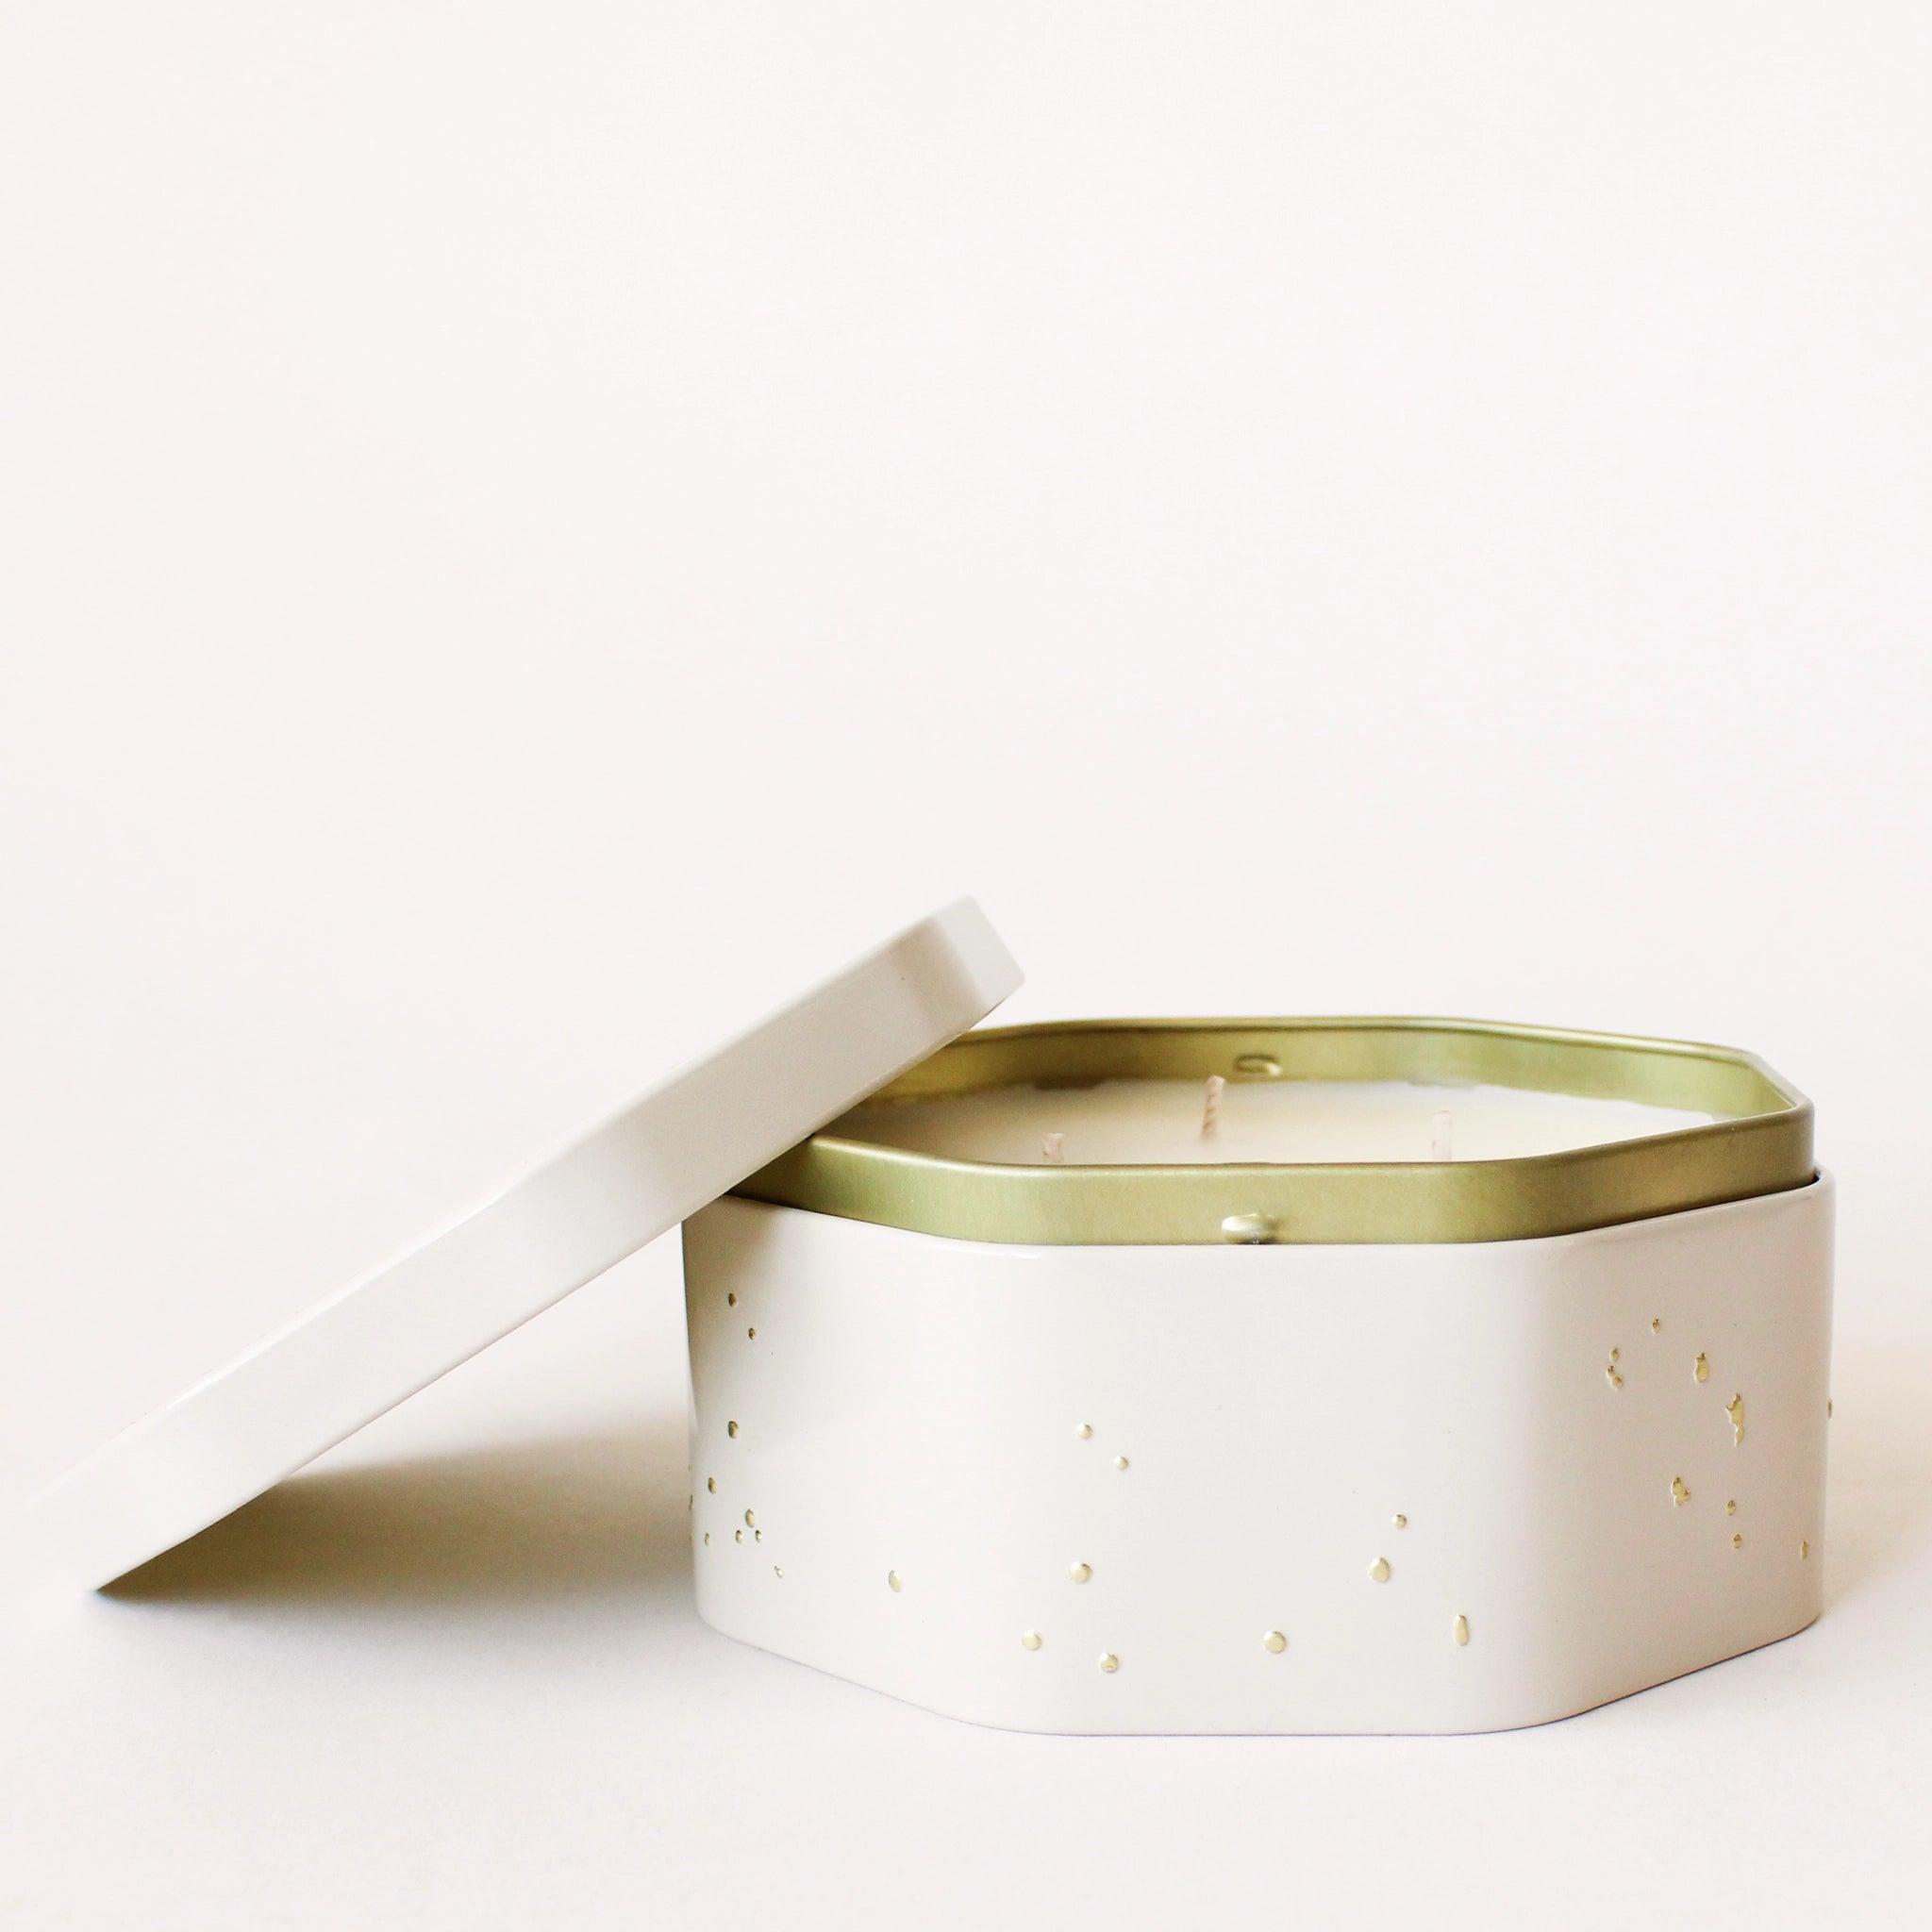 On a white background is an octagon tin in a white shade with a white three wick candle inside along with a label on the lid that reads, "Voluspa Coconut Papaya".